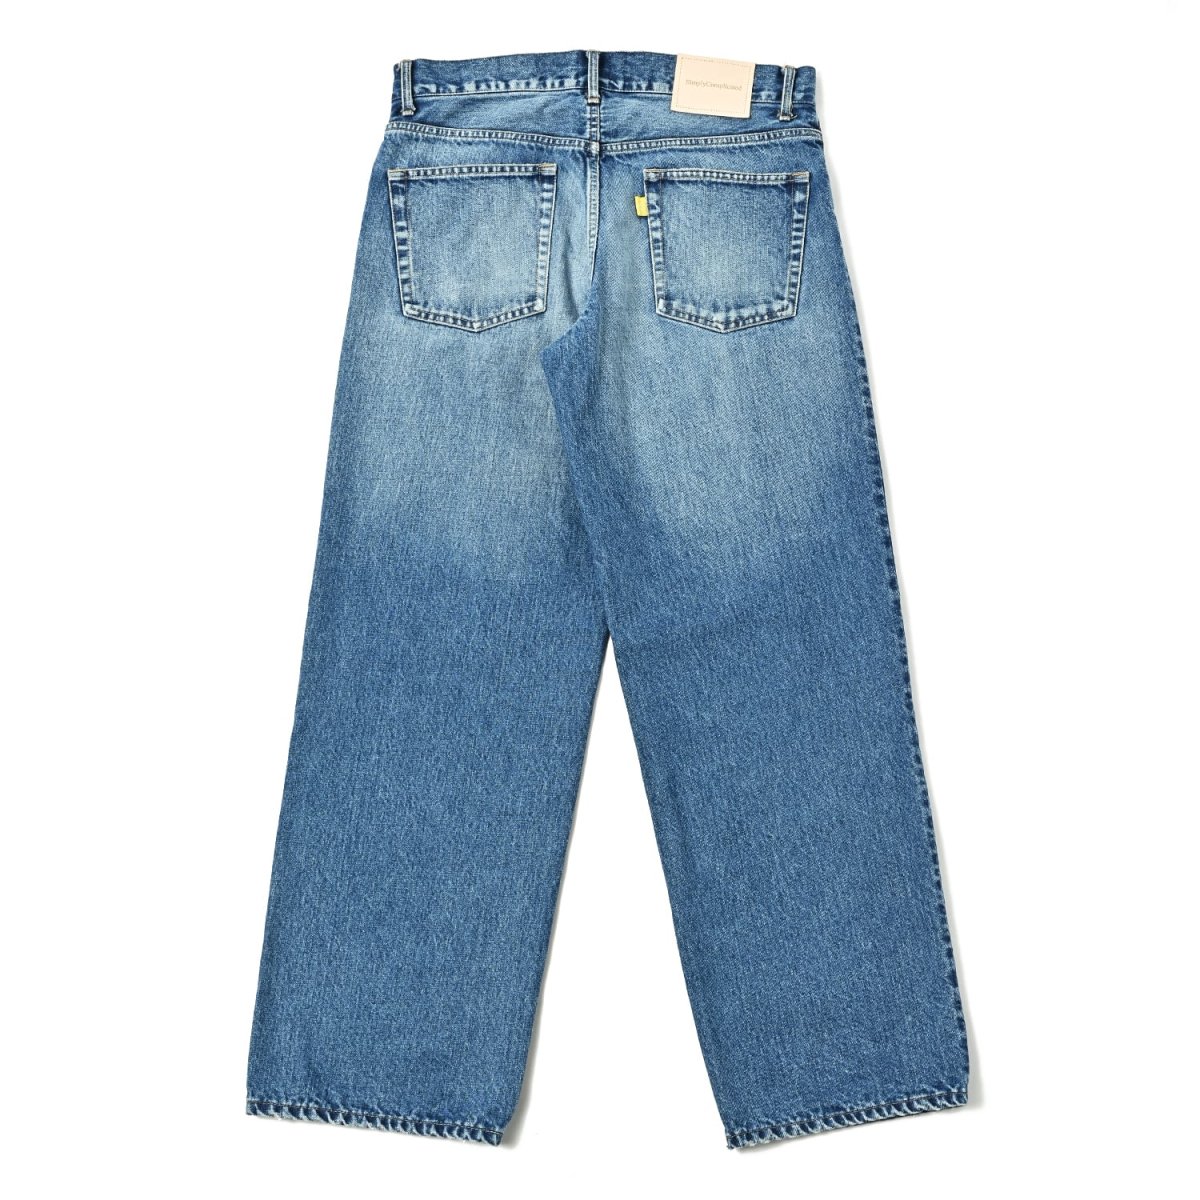 simply complicated boy friend jeans